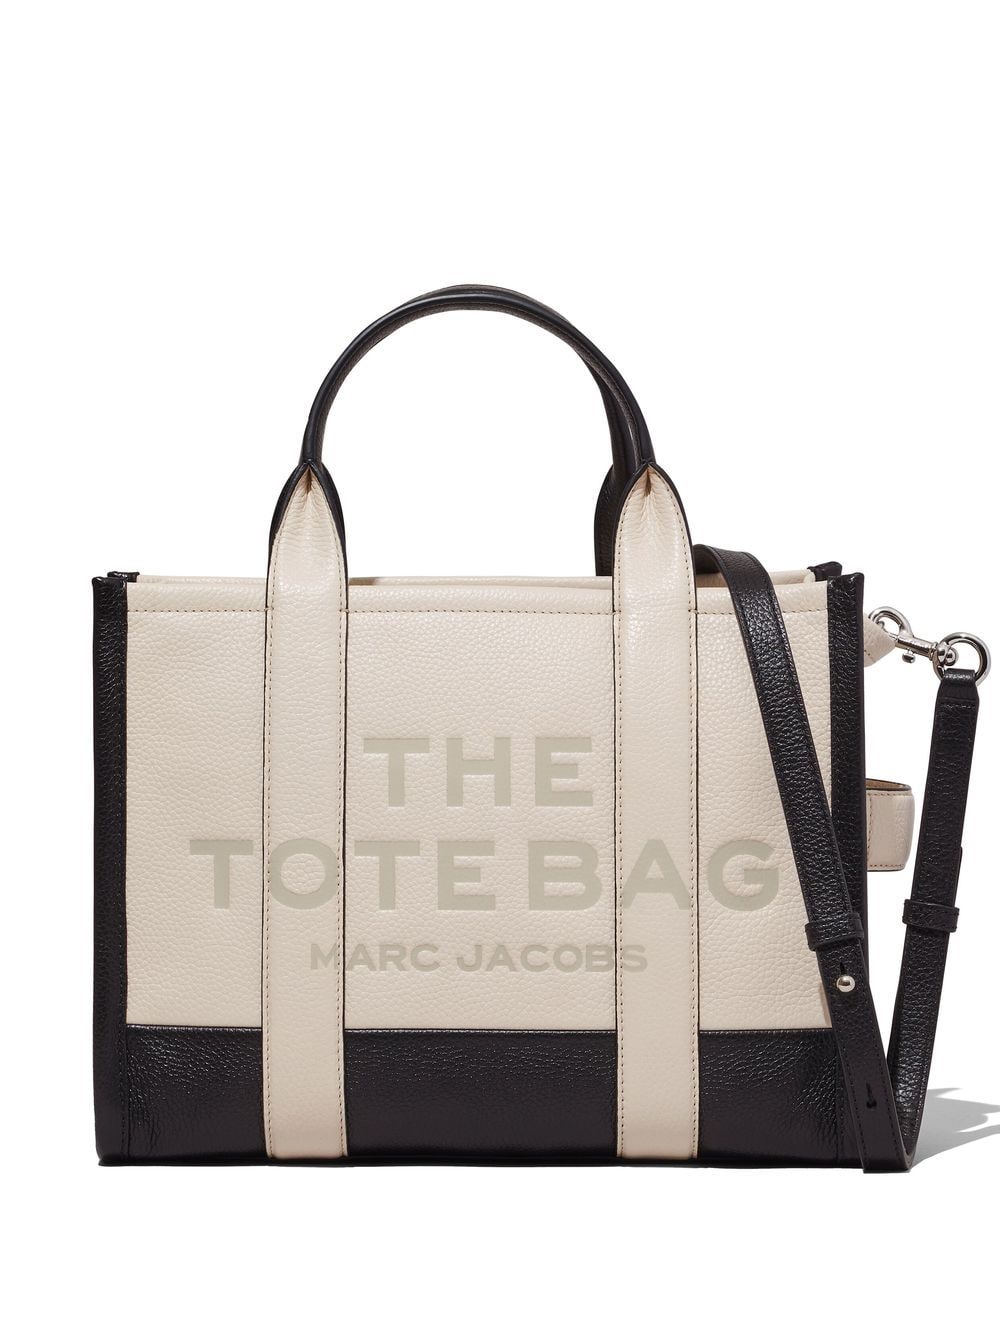 MARC JACOBS Ivory-Multicolored Medium Leather Tote Bag for Women